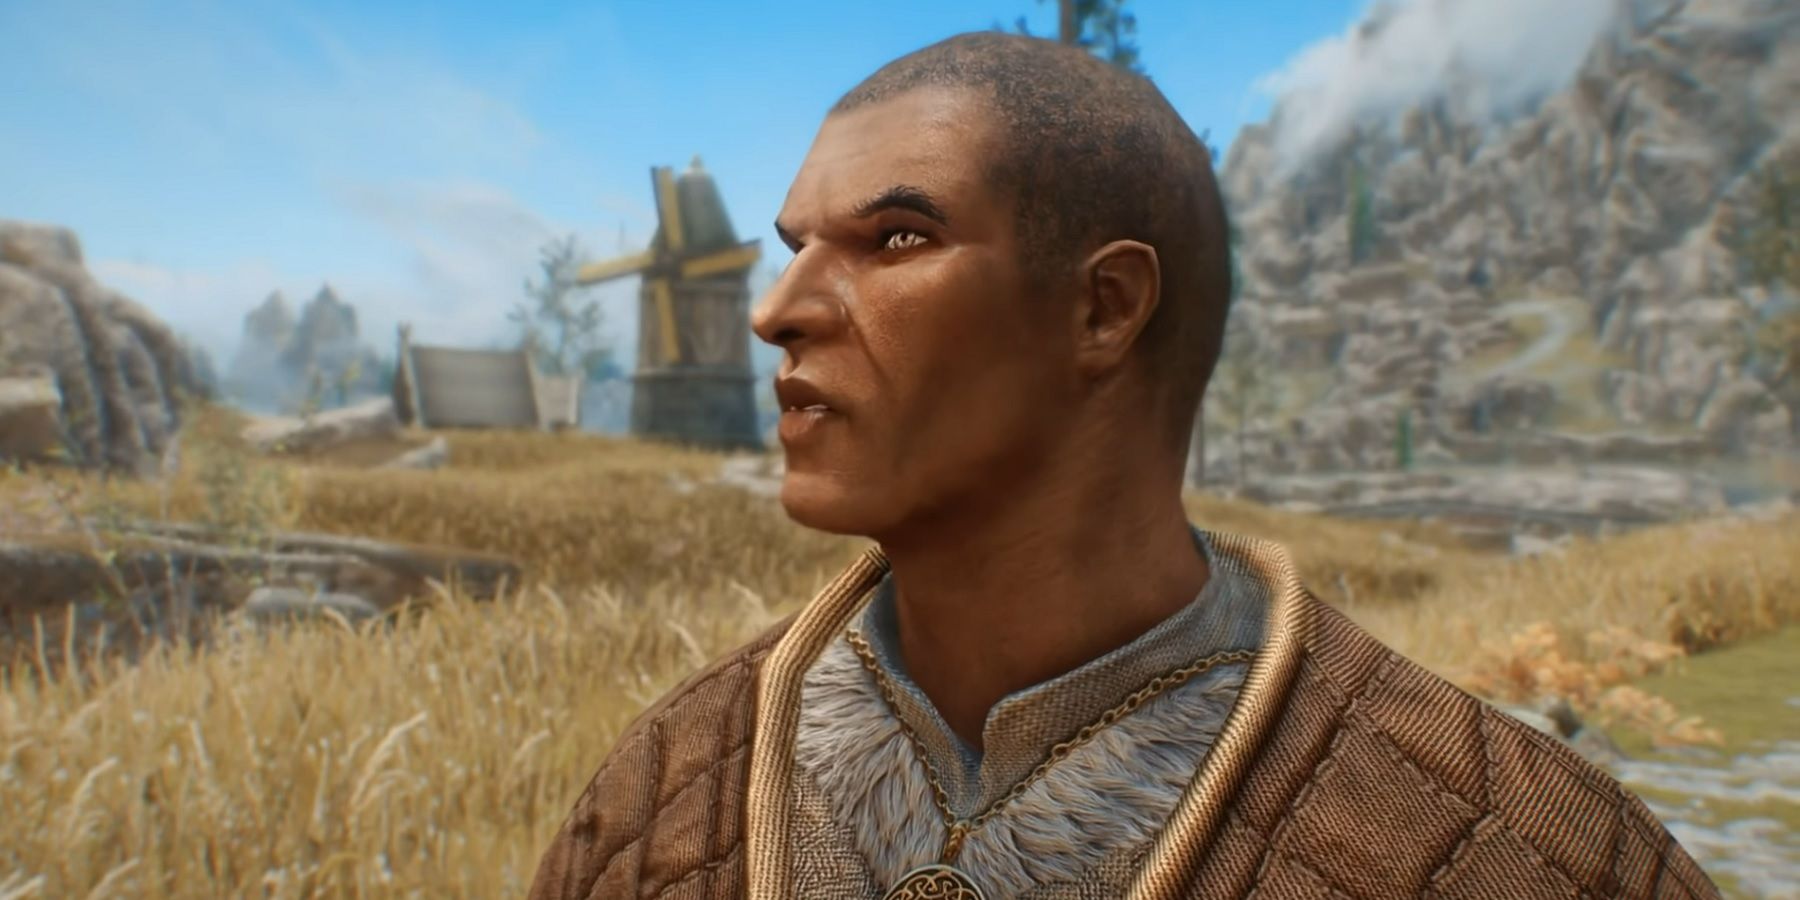 Screenshot from Skyrim showing a close-up of the Redguard Nazeem.